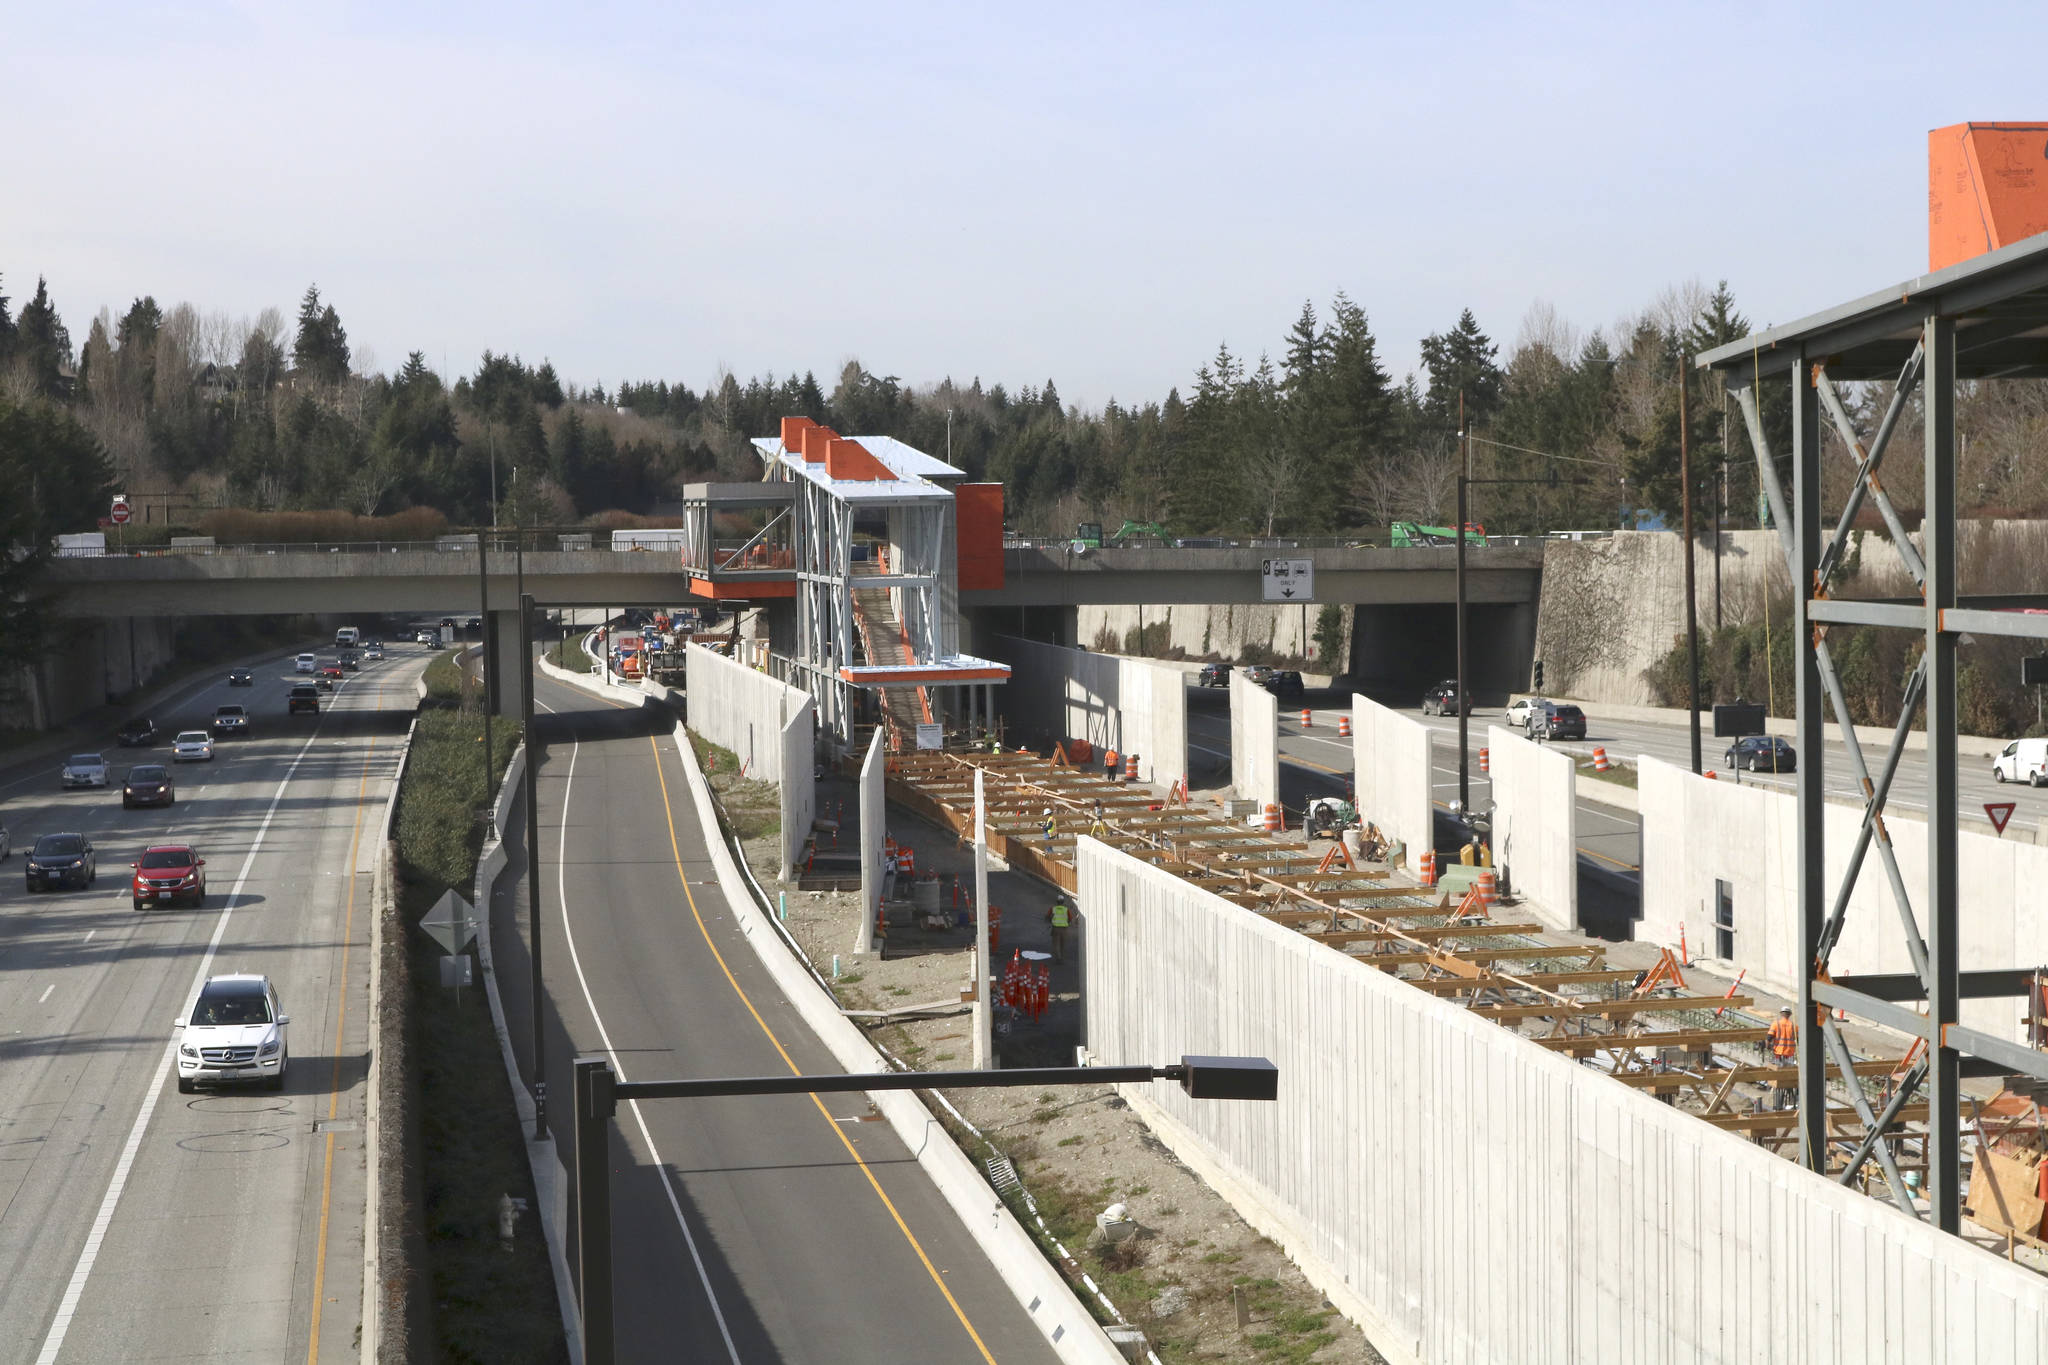 Construction crews work on the Mercer Island Station, preparing for the eventual East Link connection that will extend Seattle’s light rail to Mercer Island, Bellevue and Redmond. Kailan Manandic/Staff Photo